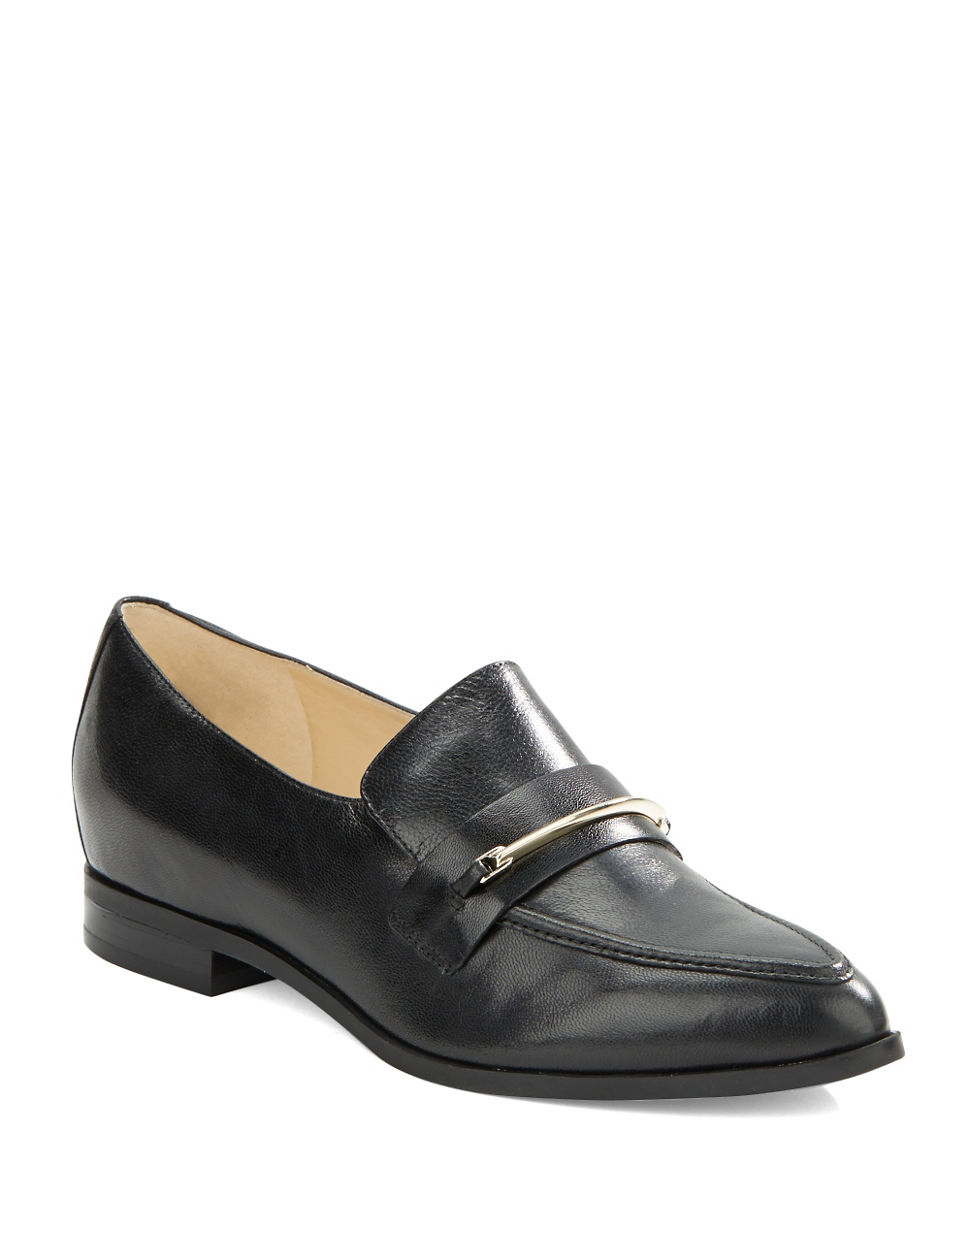 Nine West Oxidize Leather Loafers in Black - Lyst